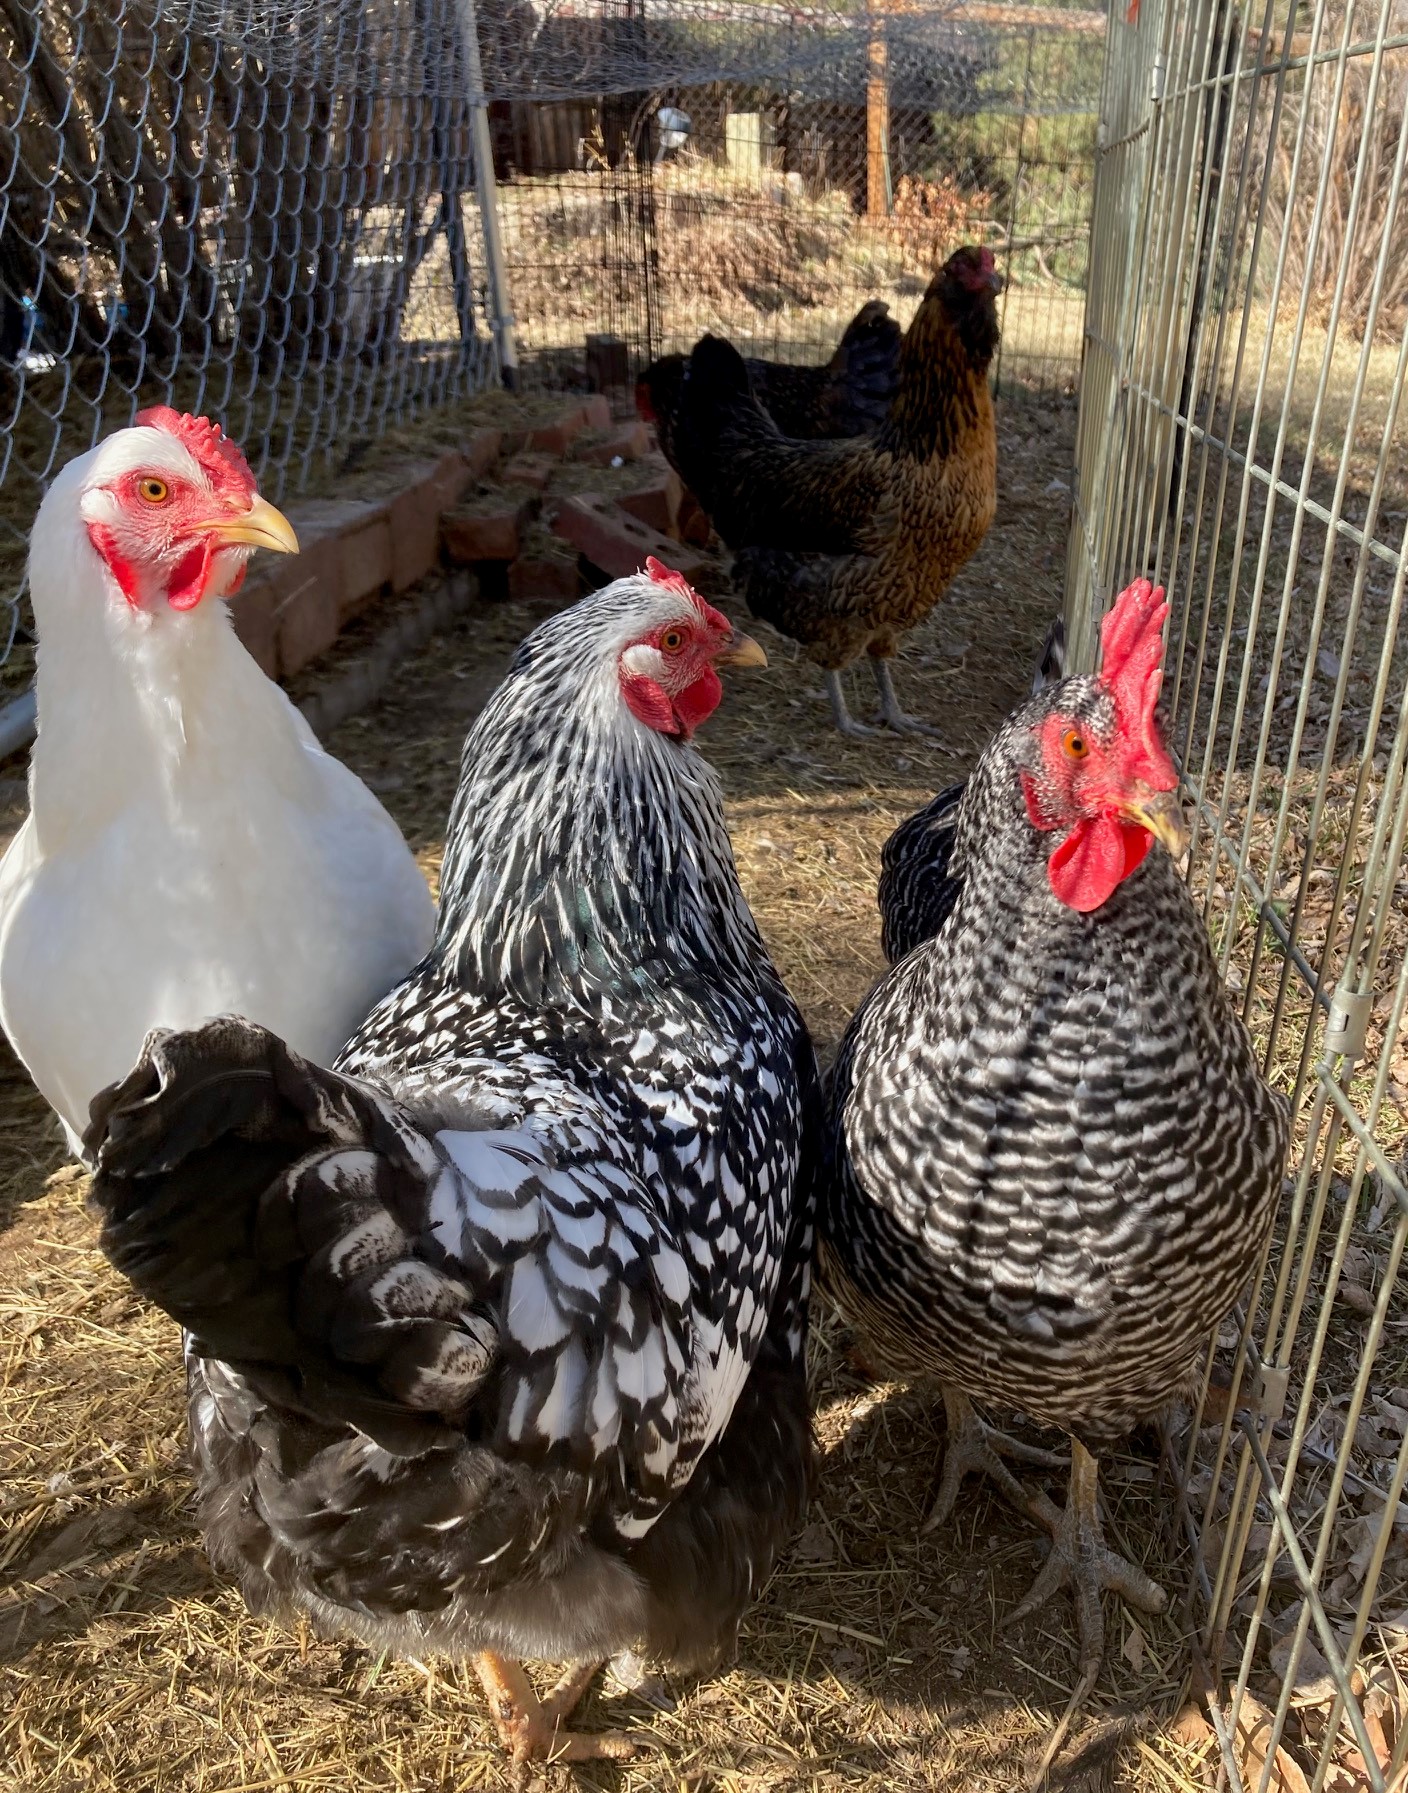 Photo of chickens, walking around in their fenced pen. Two of them are black and white speckled and are standing next to a white chicken, while the reddish brown chickens are walking around at the back of the pen.